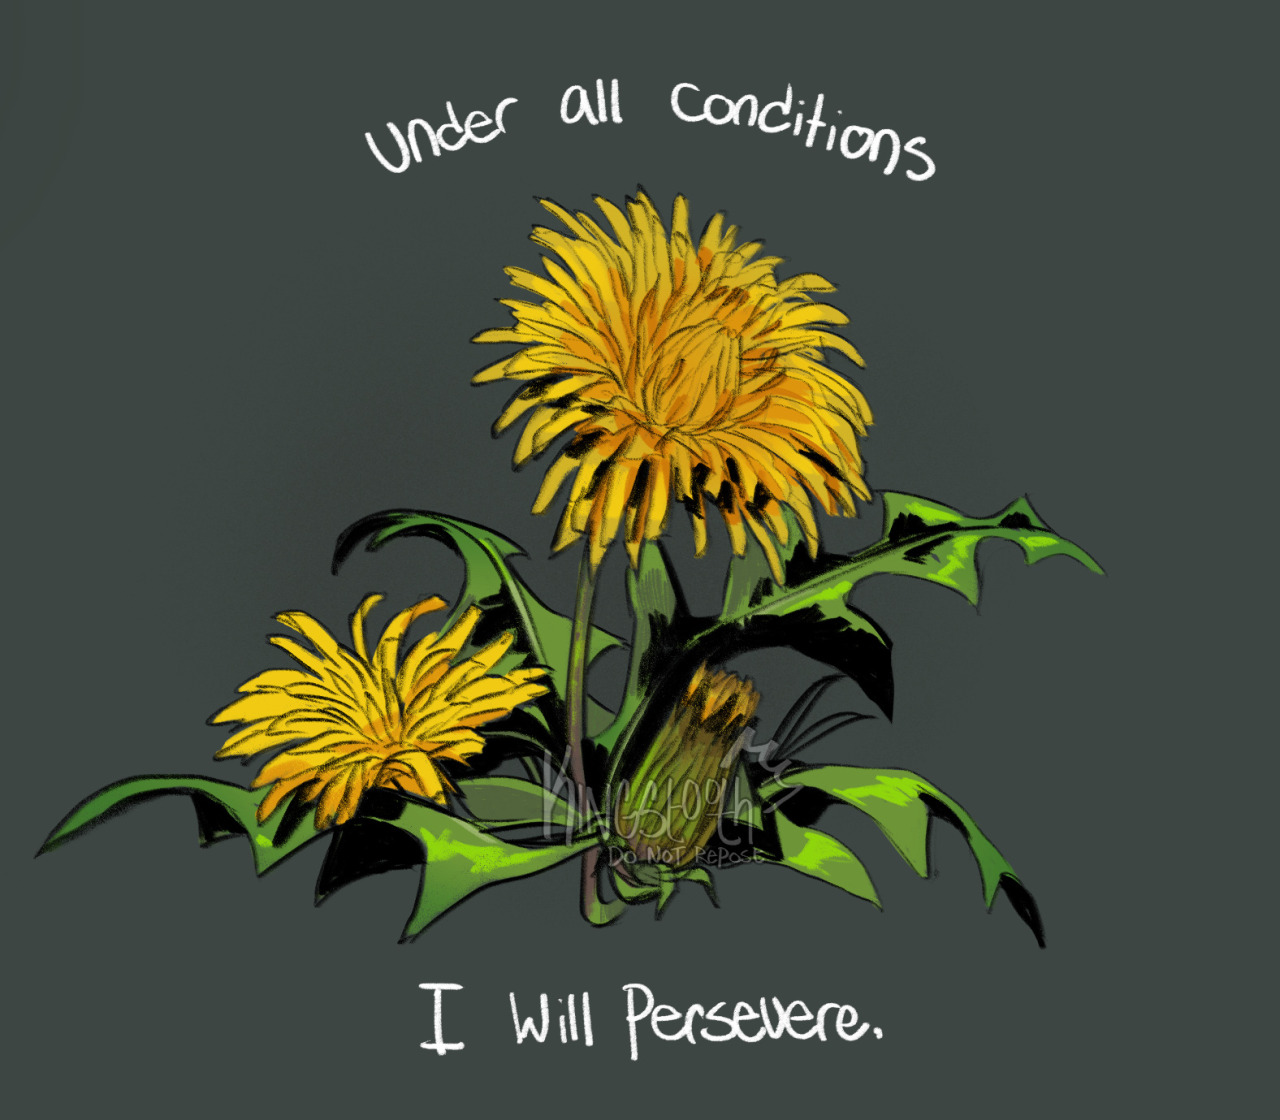 a lightly textured cool grey background with a bright yellow dandelion plant in the center.  the middle flower stands taller, and a flower to the left of it is nestled into the leaves, while a dandelion bud grows in front of both of them.  above the dandelions text reads "Under all conditions" and below it more text reads "I will persevere."